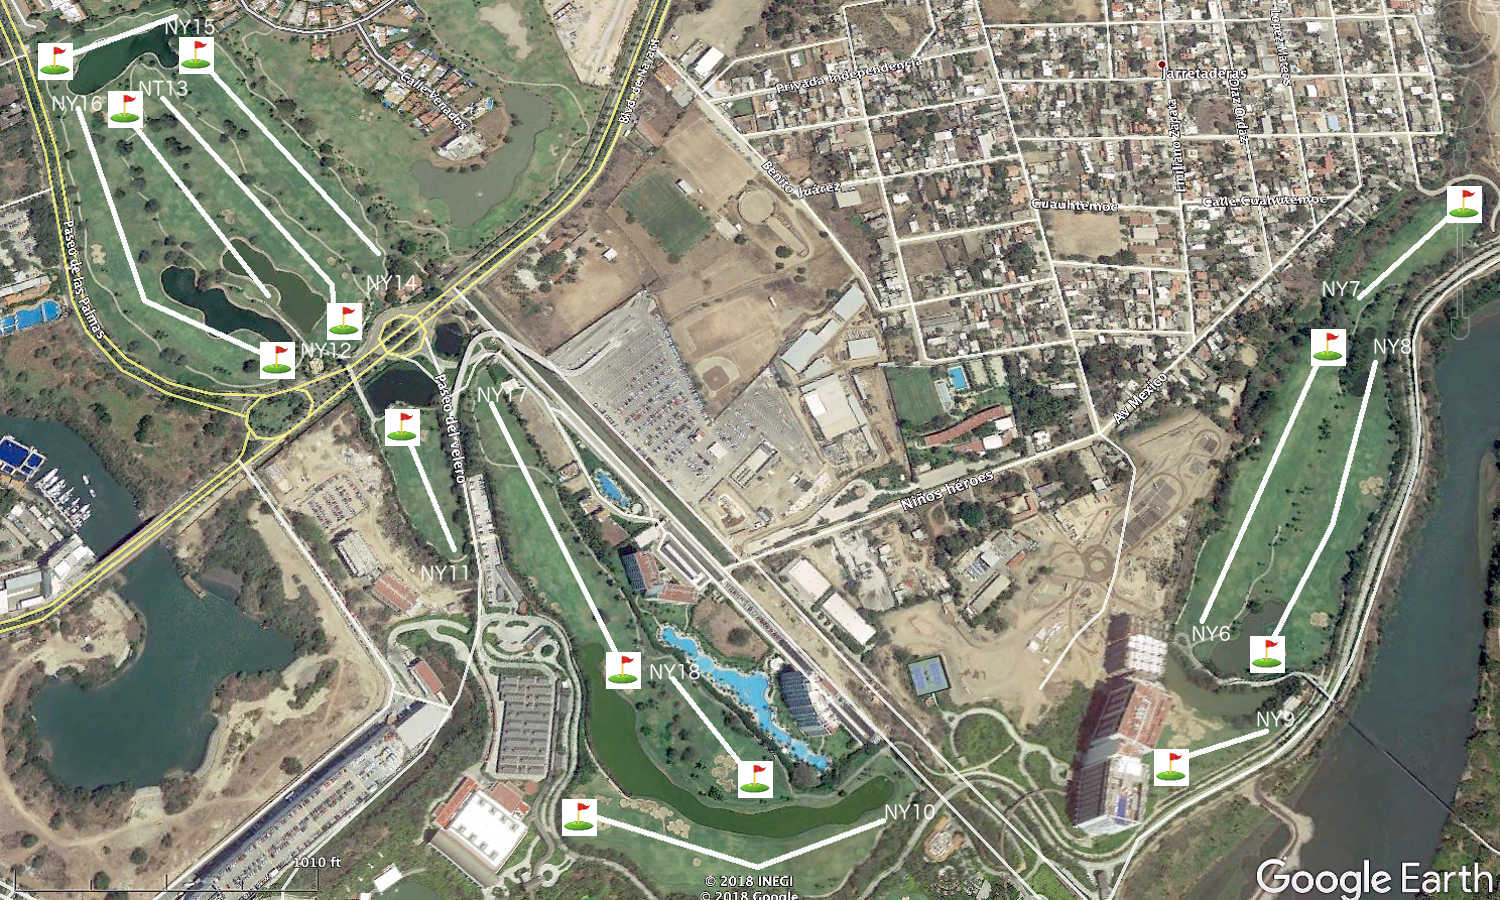 The remaining holes are on the North side of the Ameca River.  The 6th, 7th, 8th and 9th holes are in the area of Tower Five.  The final 9 holes are on the north side of the property.  Interesting for sure!  (Please tap the image to expand, then tap your browser's back arrow to return to the page.)